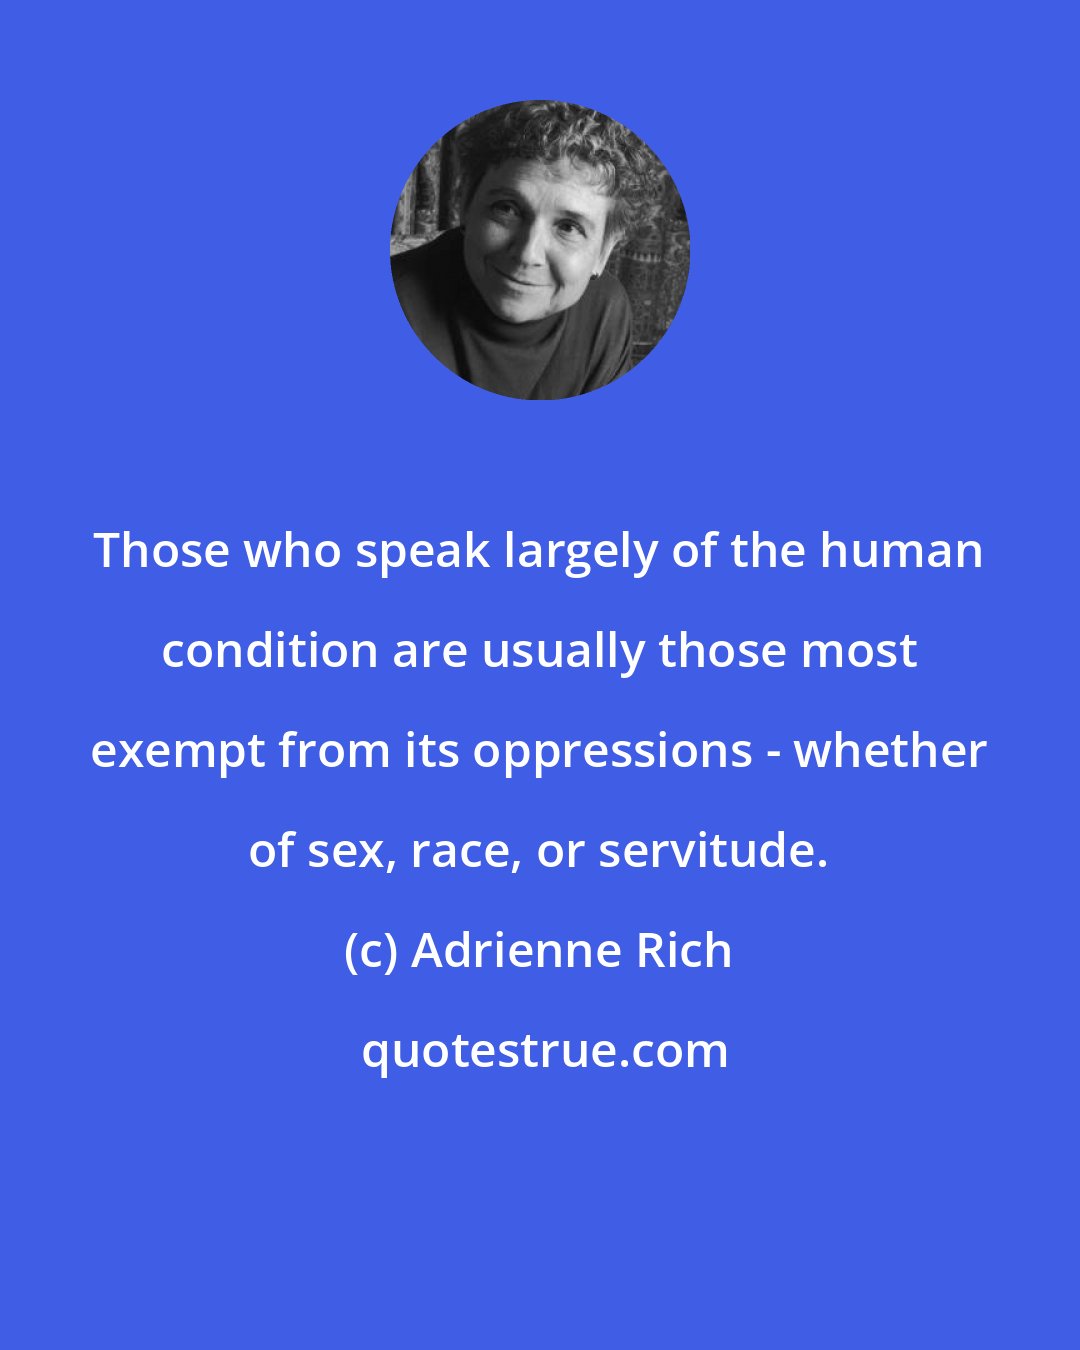 Adrienne Rich: Those who speak largely of the human condition are usually those most exempt from its oppressions - whether of sex, race, or servitude.